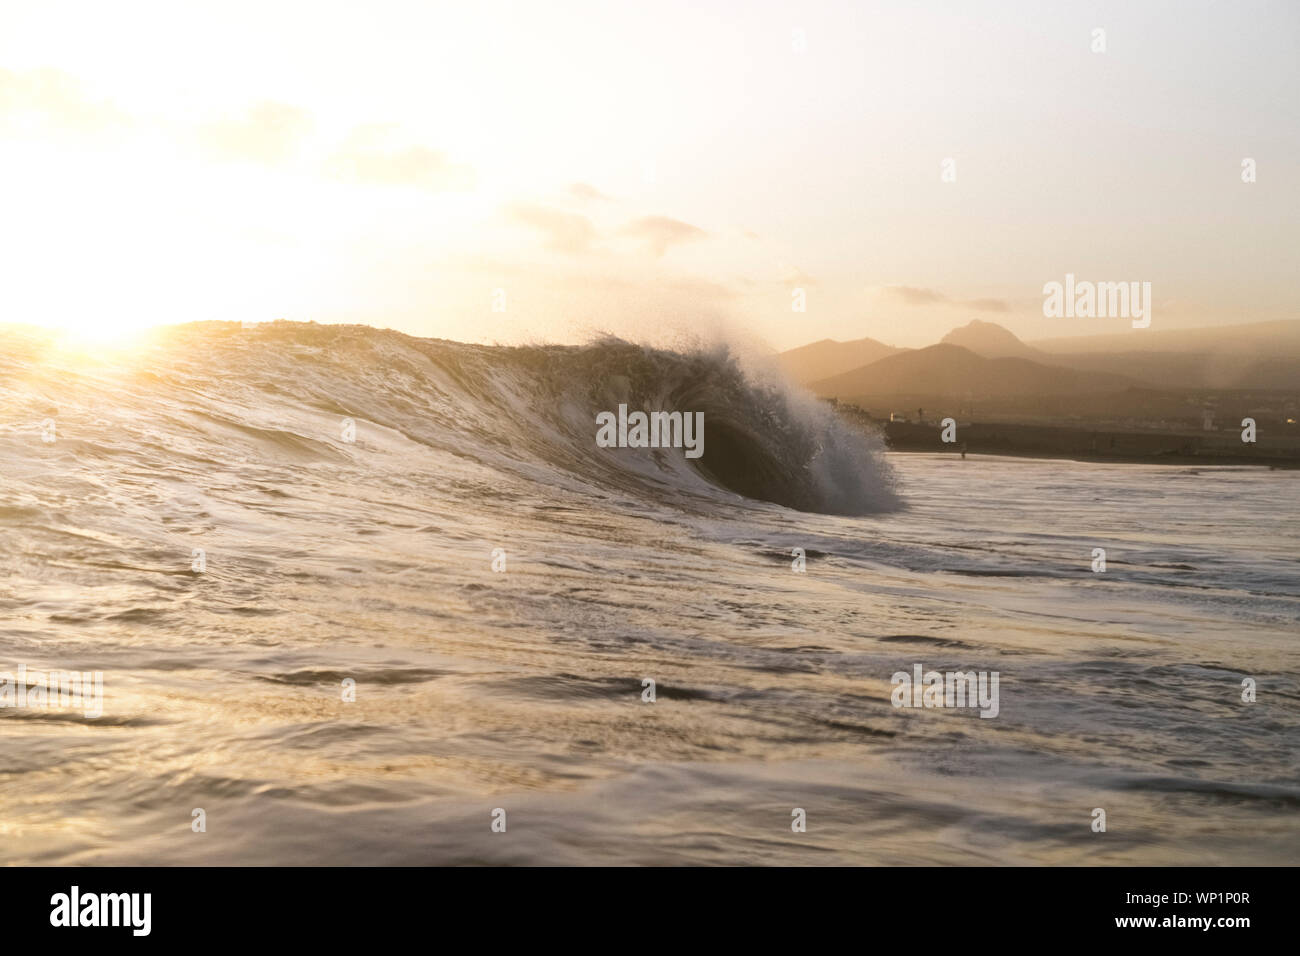 Backlit scene of wave breaking at sunset with shoreline in background Stock Photo